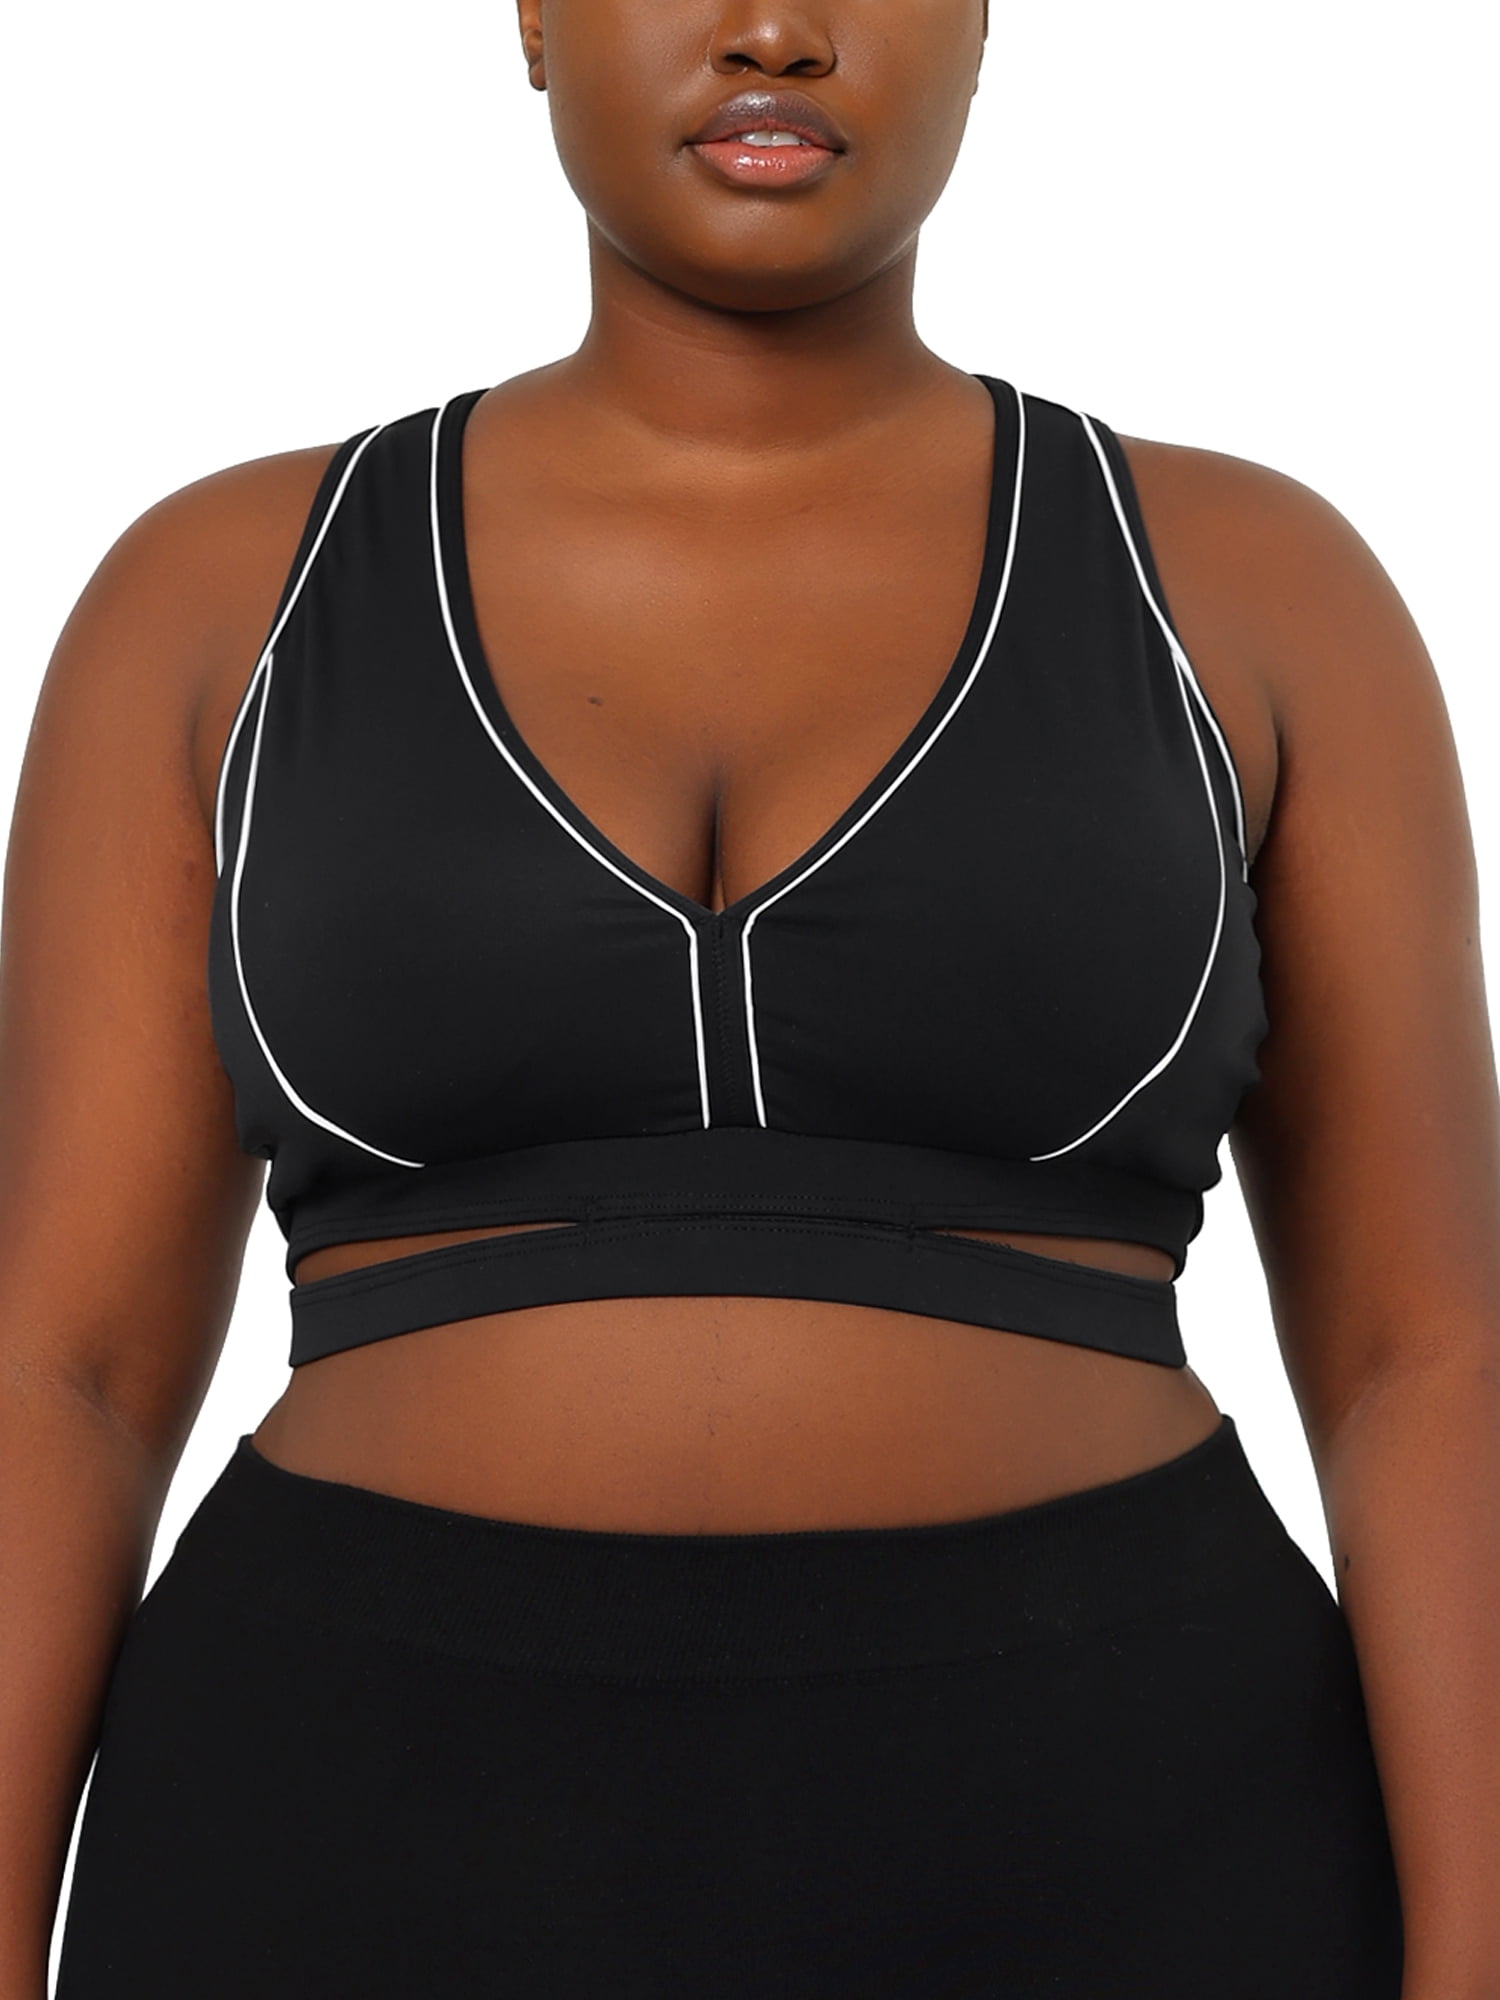 Women's High Impact Netted Racerback Wire-free Control Solid Sports Bra Tank Top 